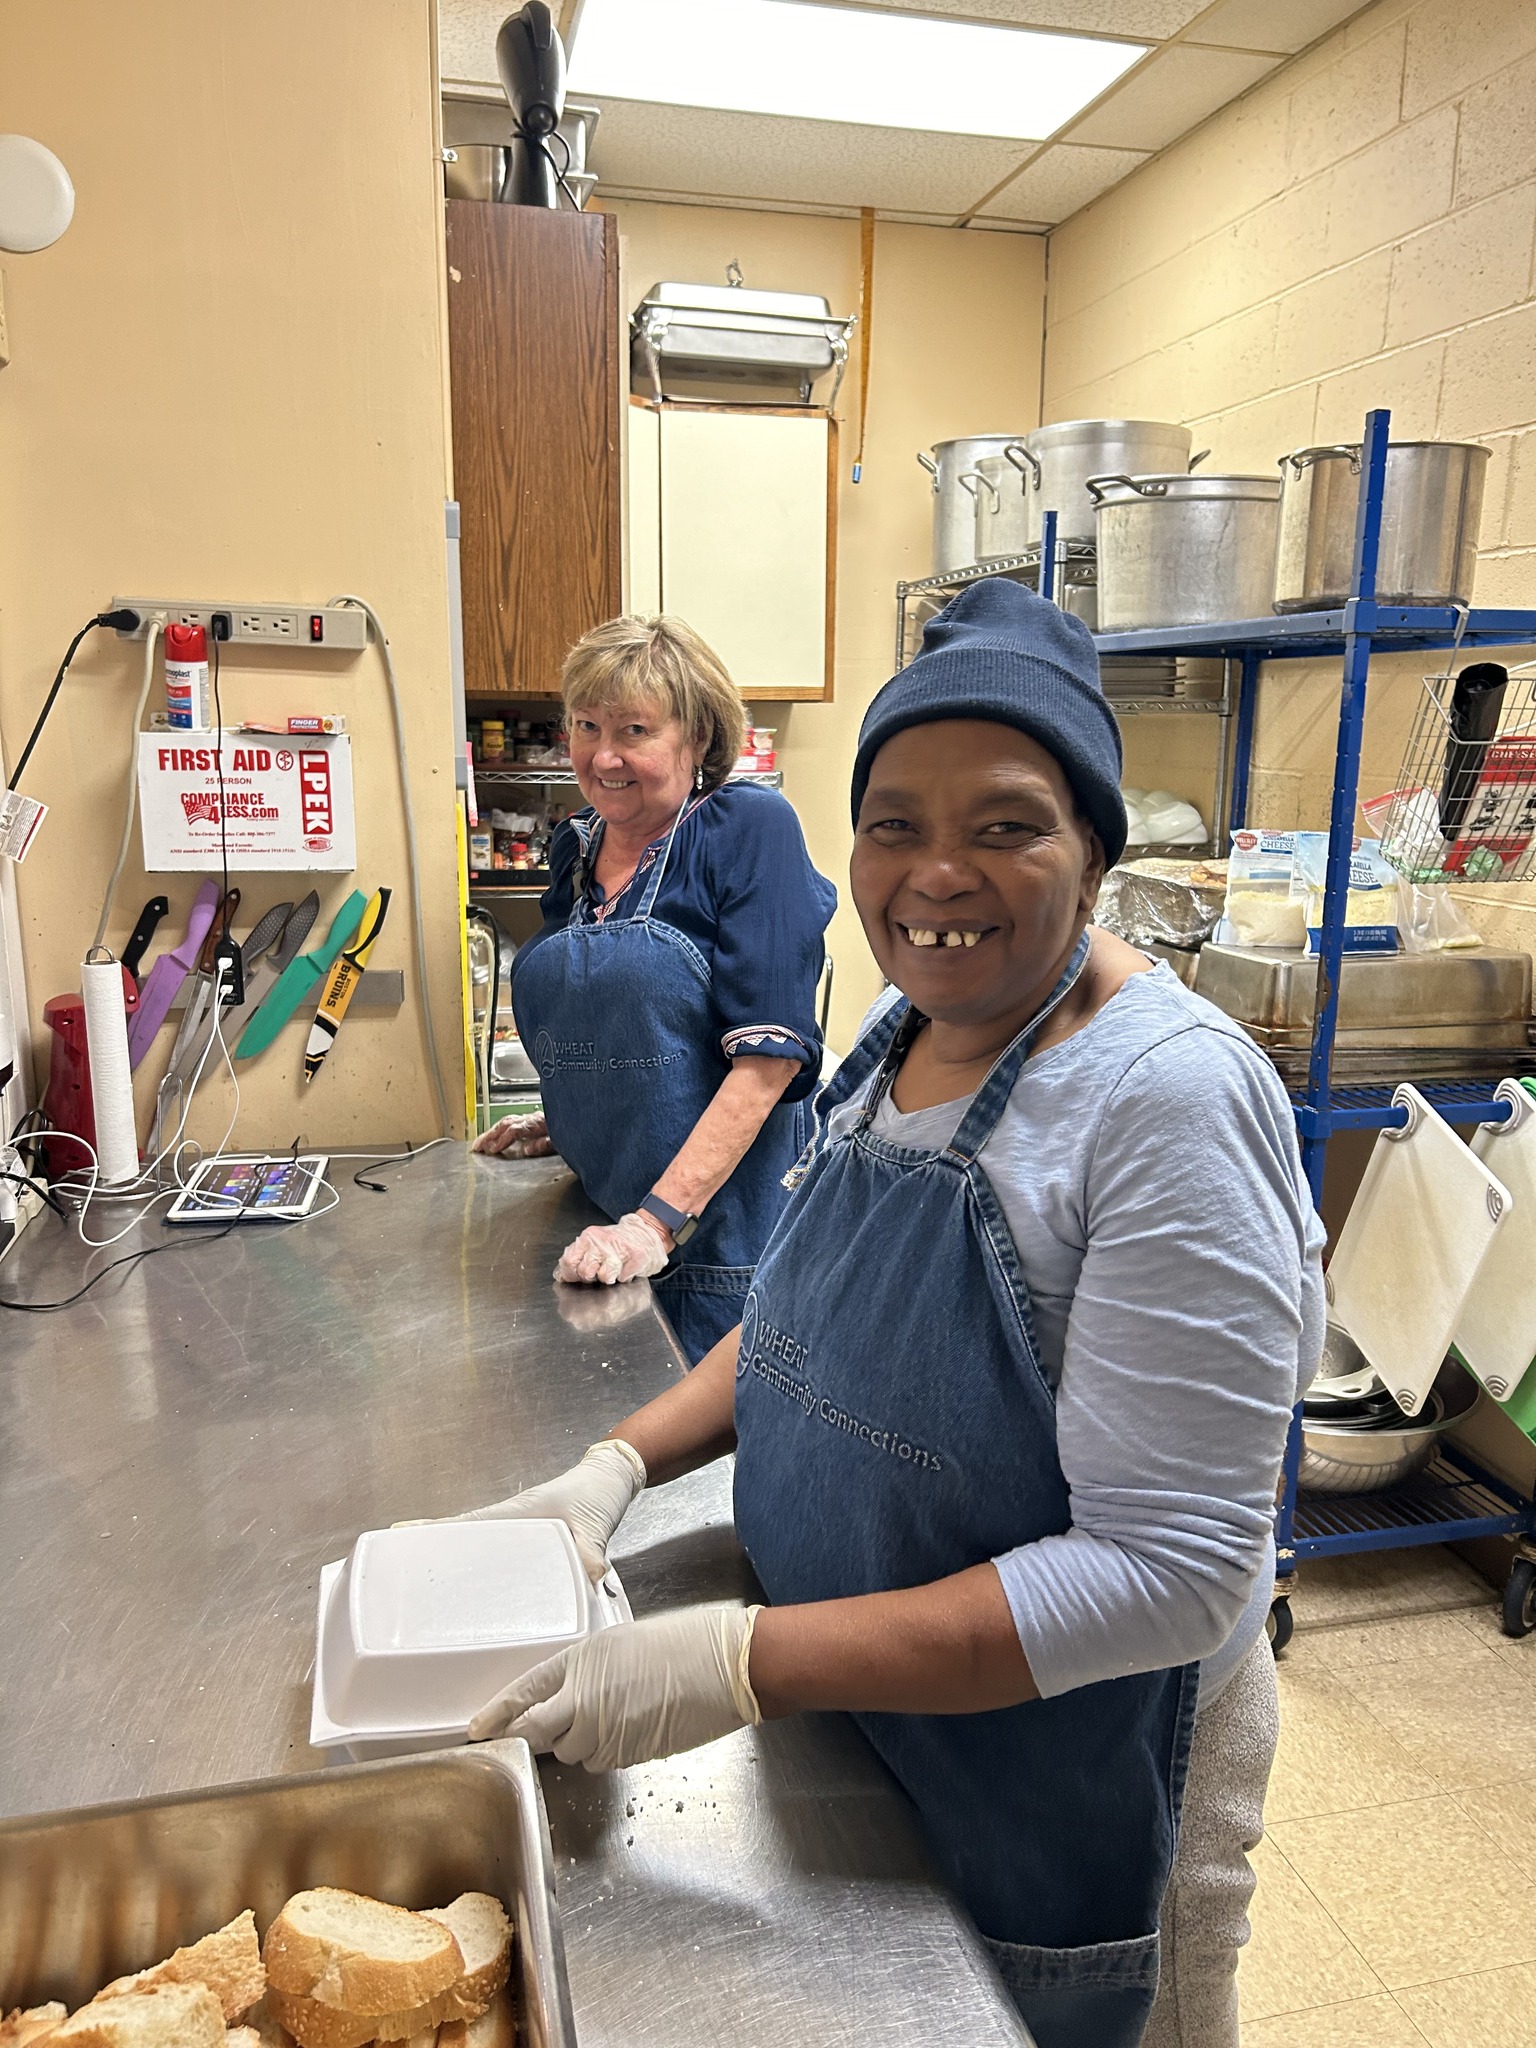 Volunteers Make Lunch at WHEAT